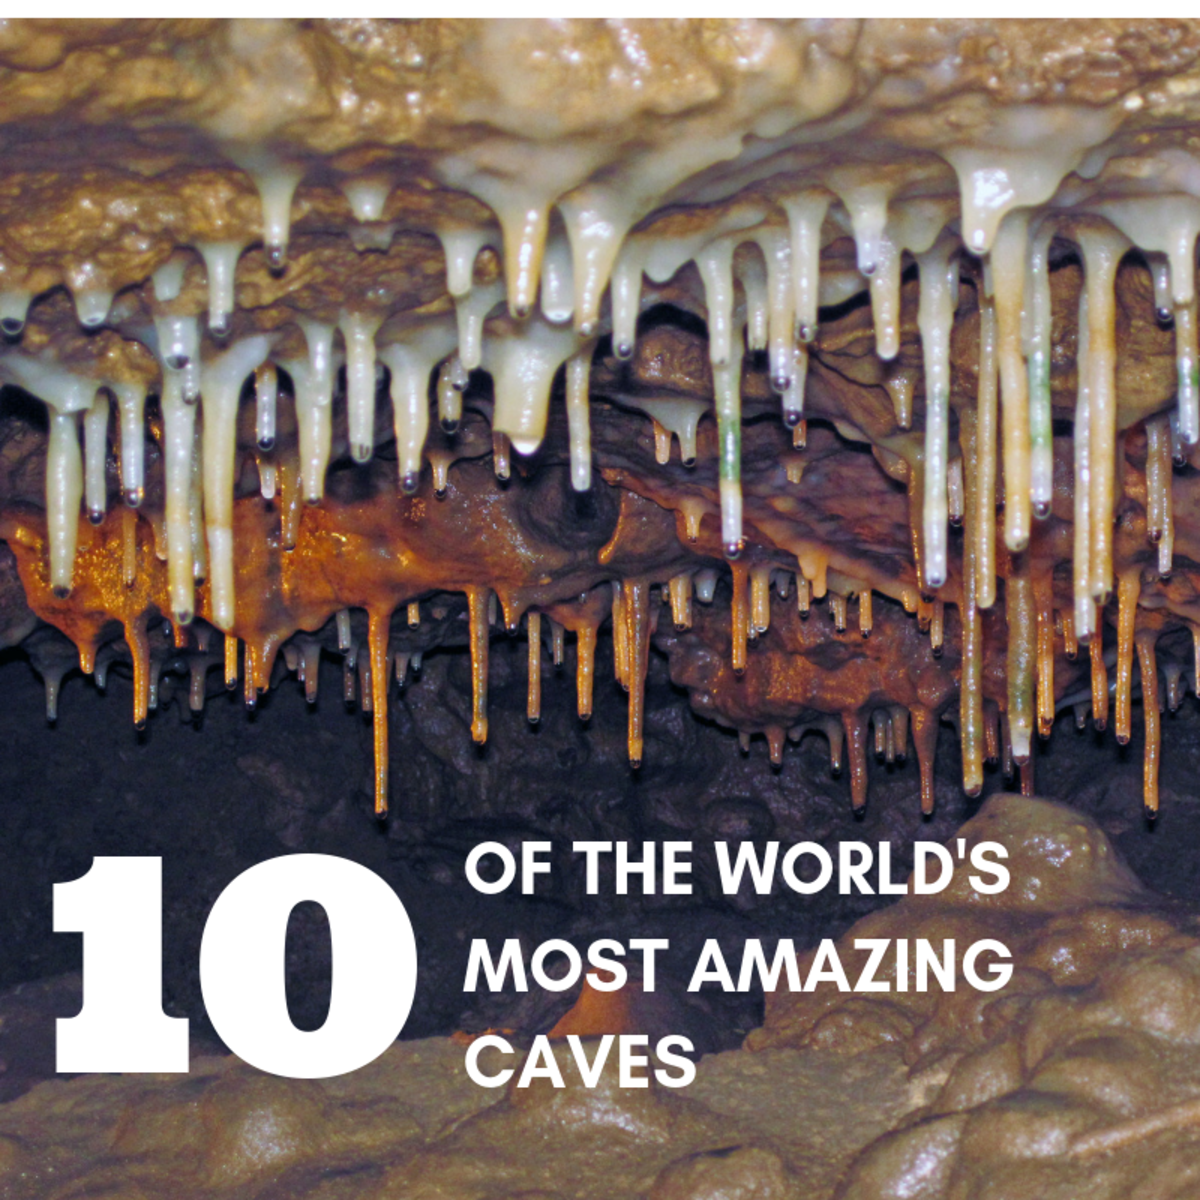 The Top 10 Most Amazing and Beautiful Caves in the World